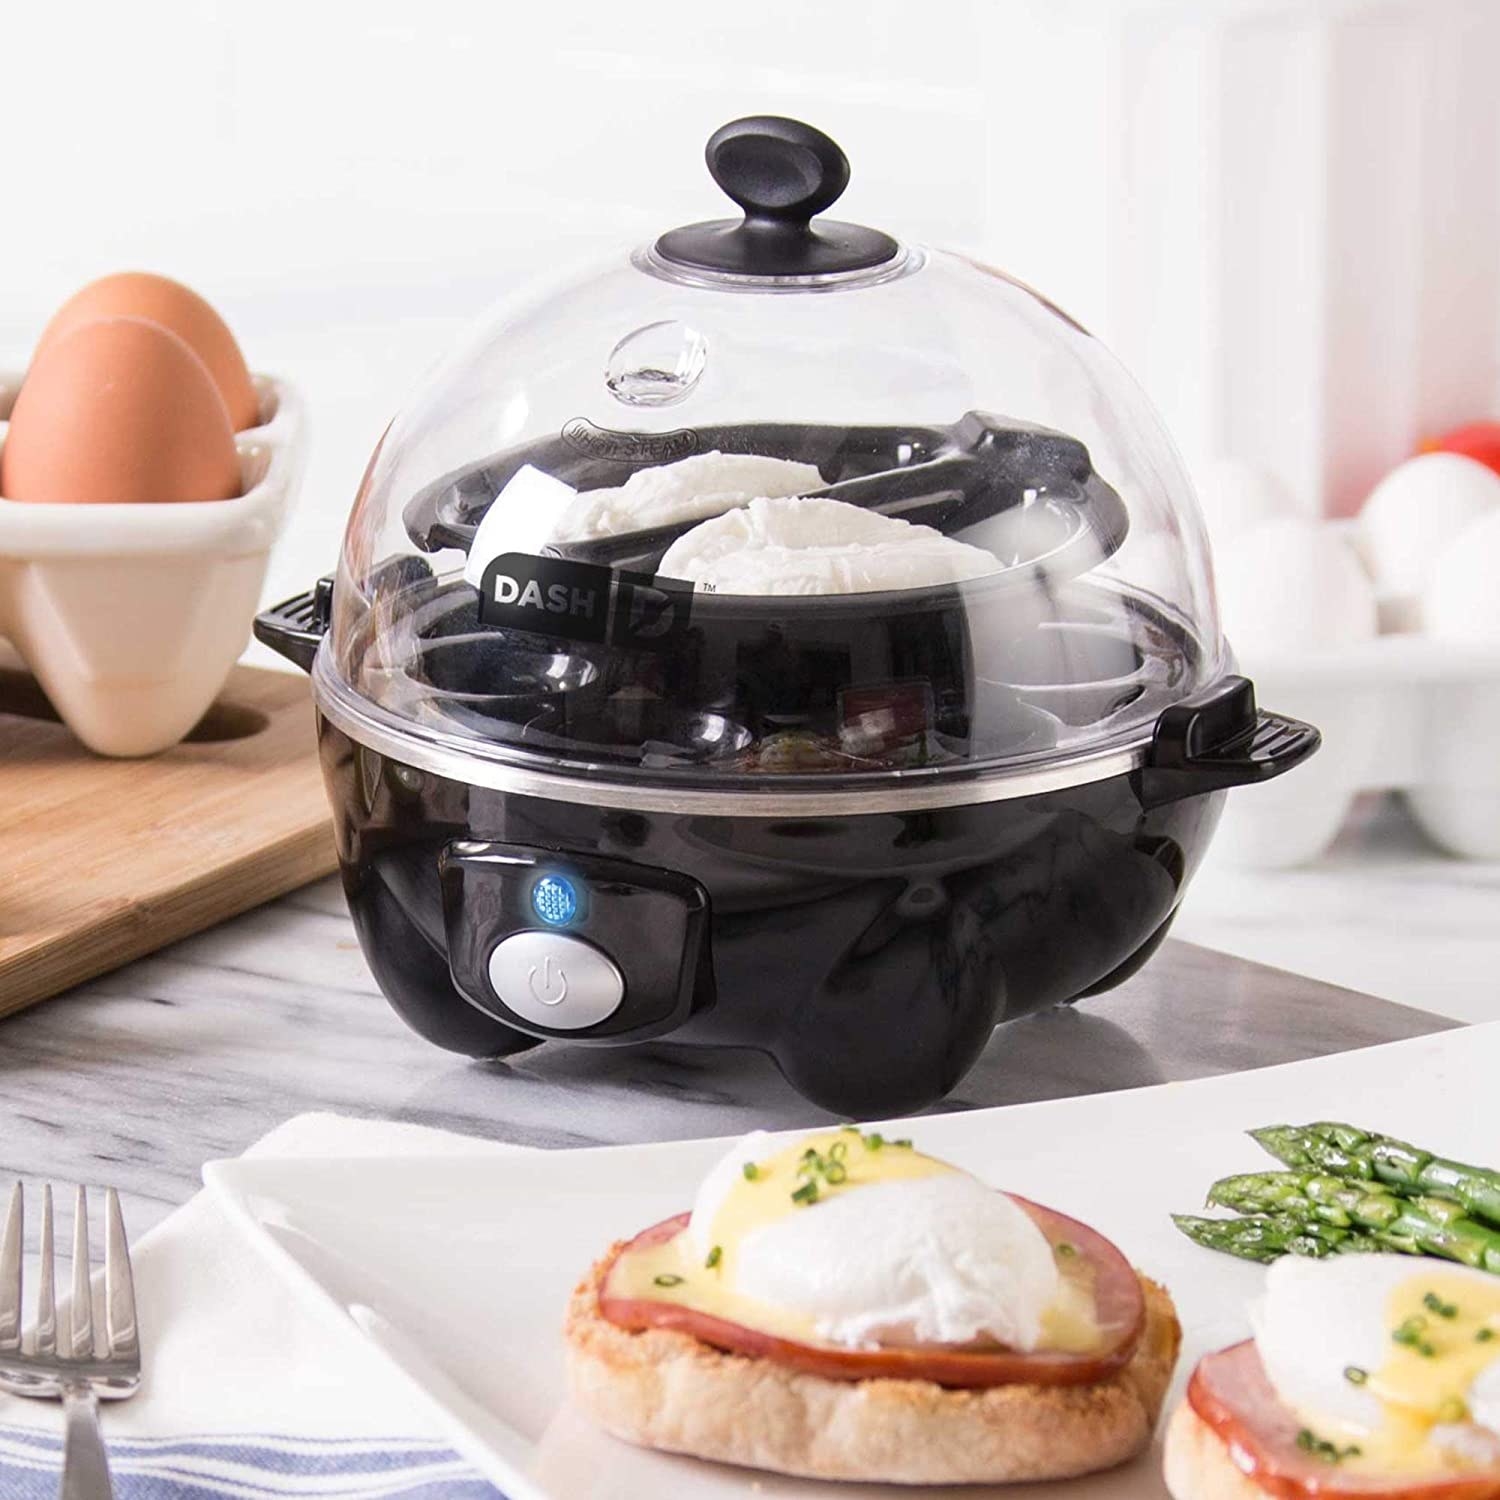 Rapid egg cooker on table next to breakfast sandwich